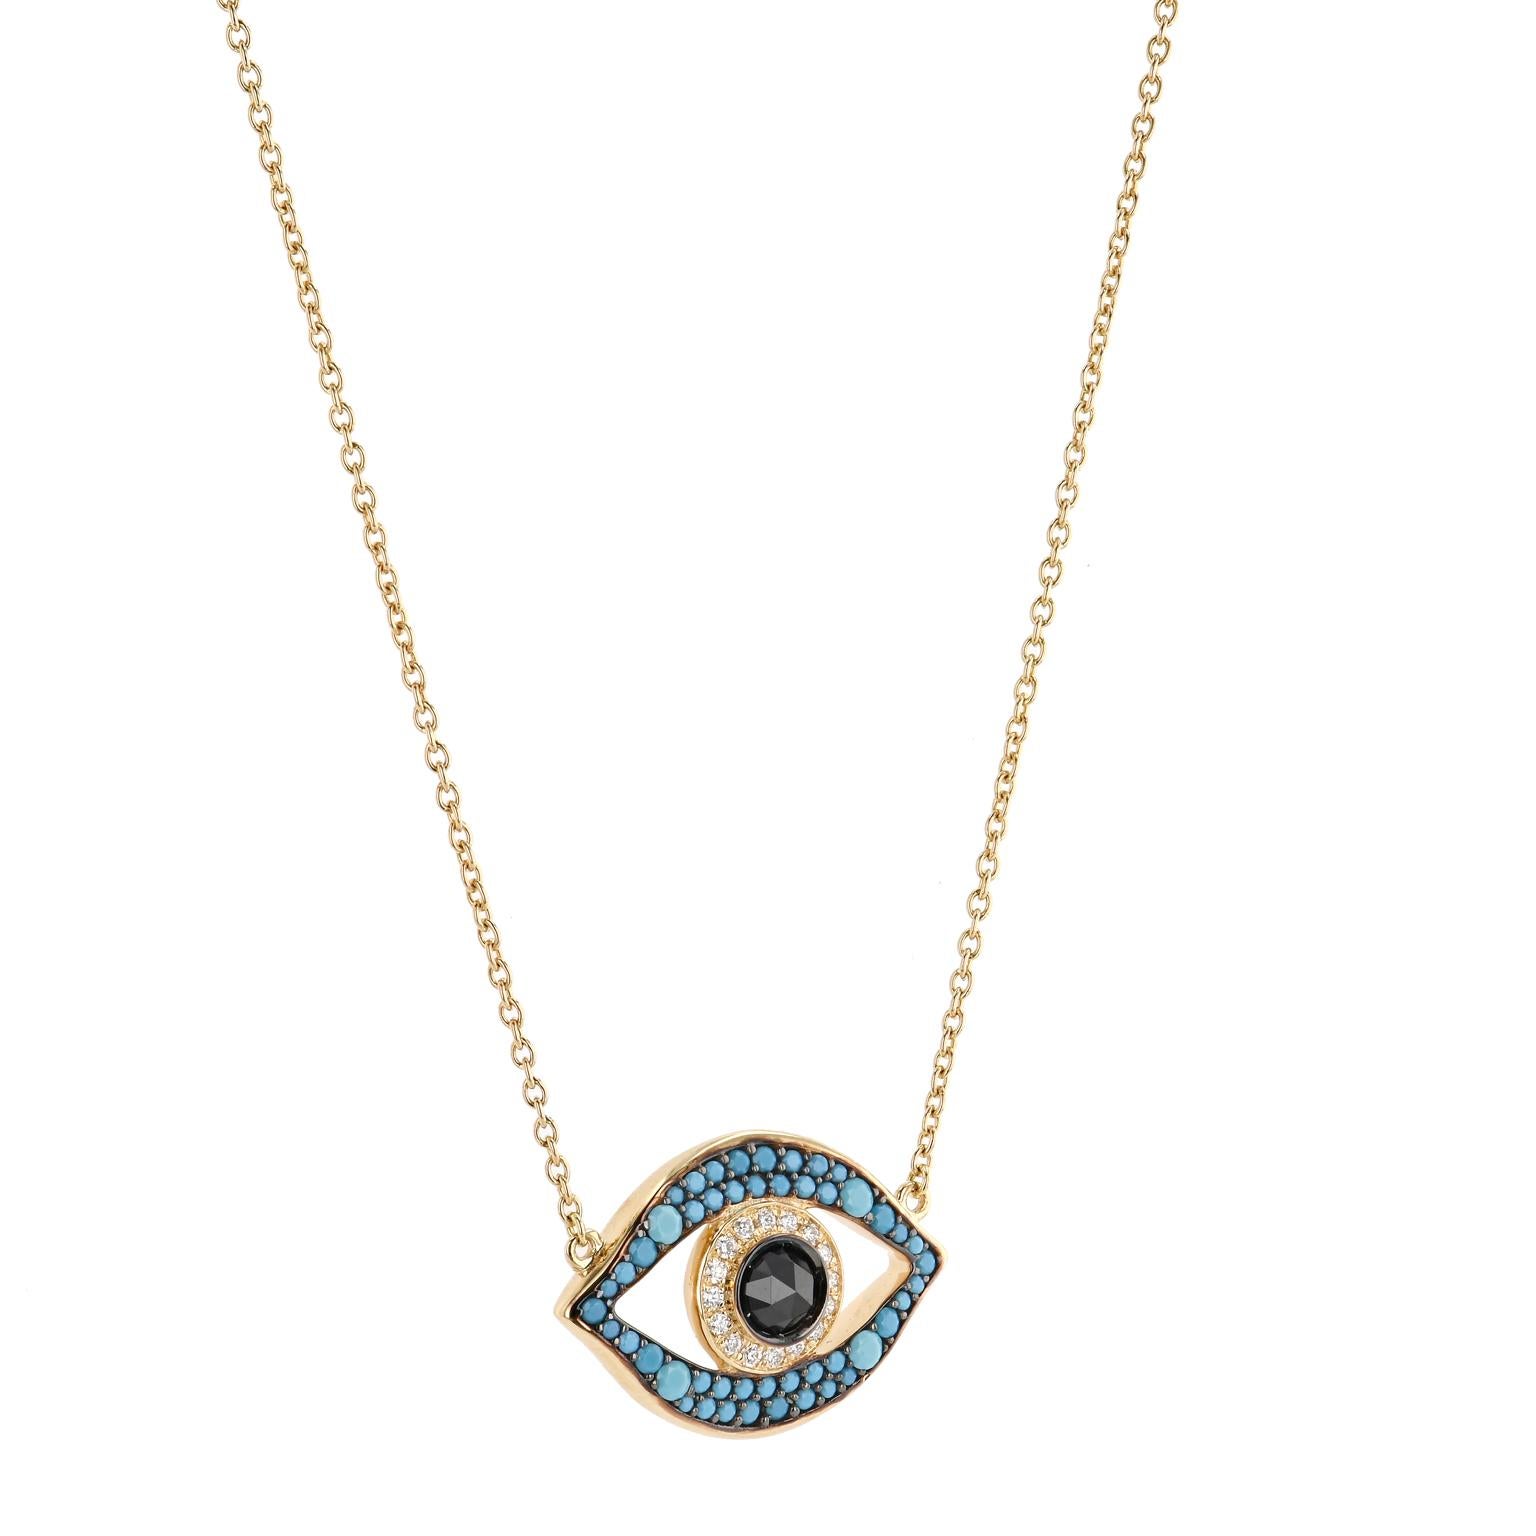 Turquoise, Zircon and Diamond Evil Eye Pendant Set in 14 karat Gold 16-17 inches.

Nothing evil can get past this eye-catching 14 karat gold Evil Eye pendant, adorned with 0.80 carats of crushed turquoise, 
holding a centered rose cut 0.85 carat